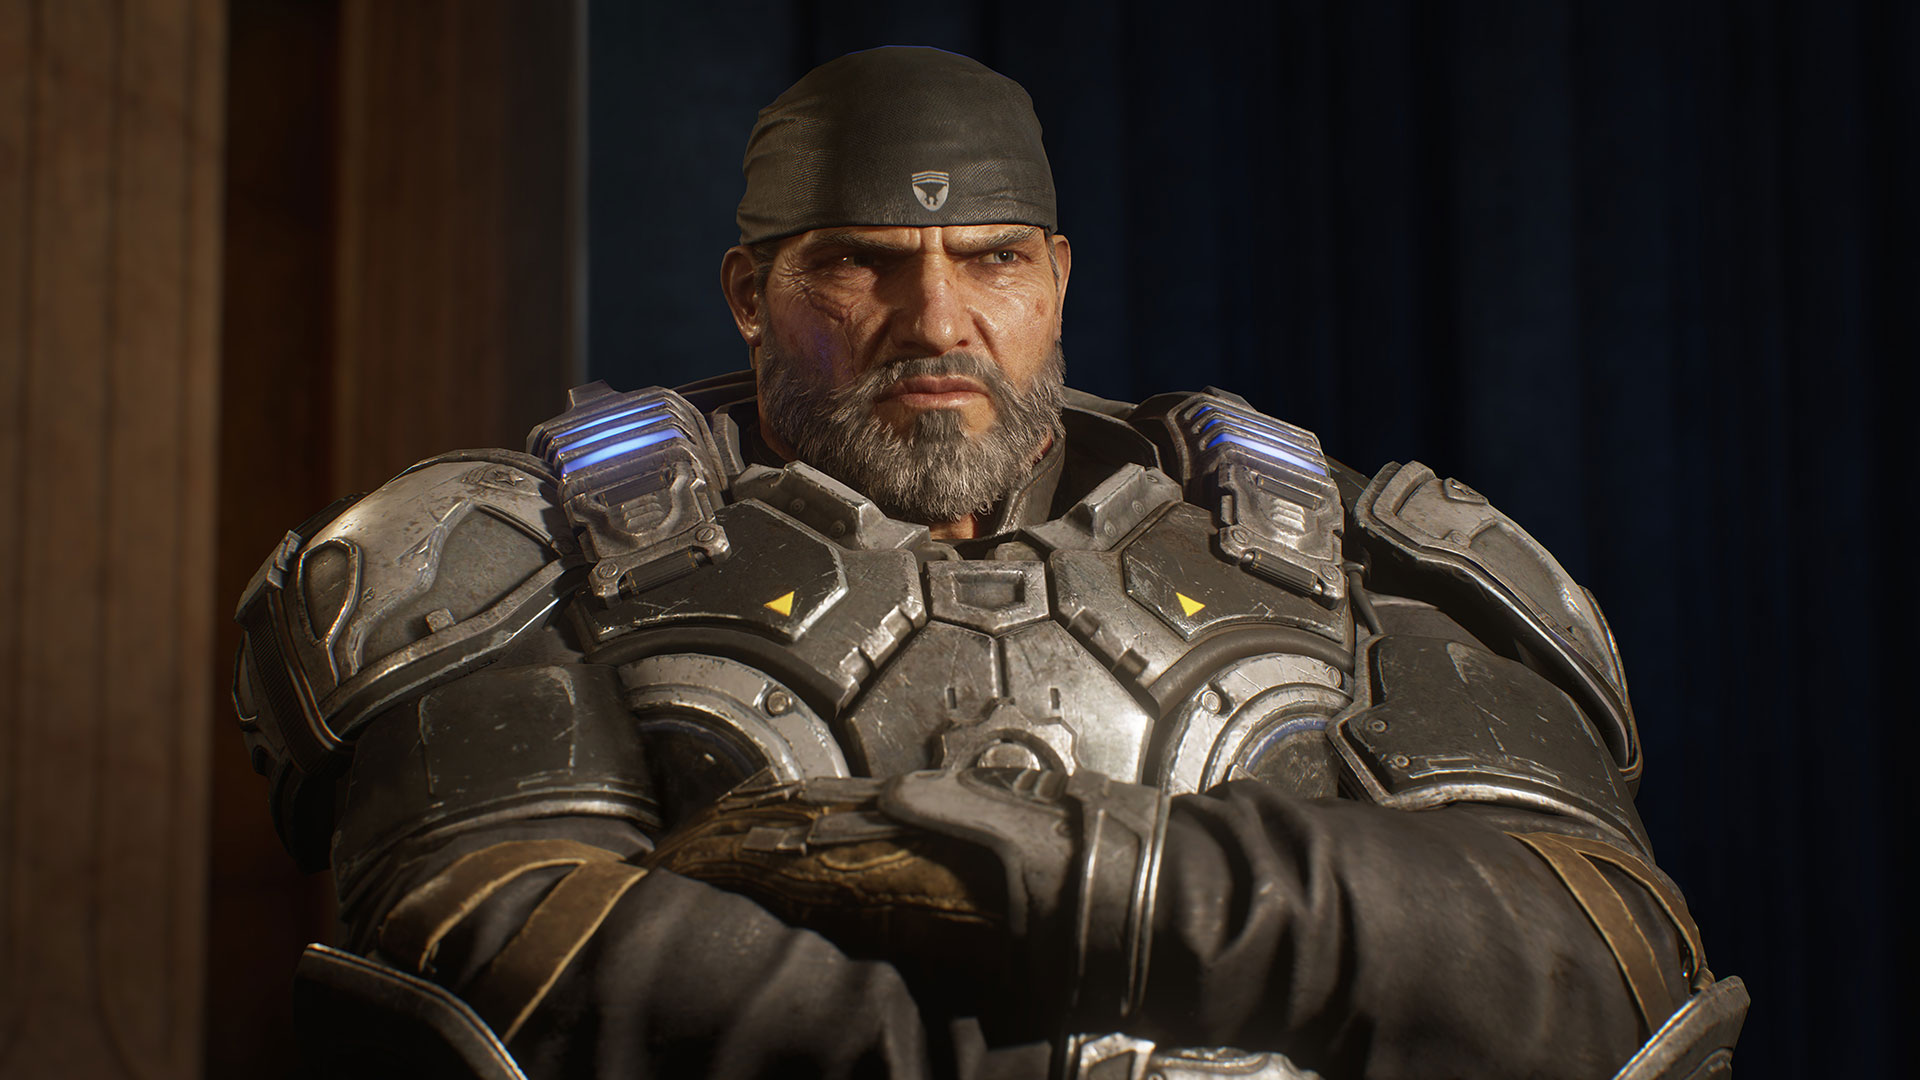 Gears 5 developers say they’re moving on to “future projects”